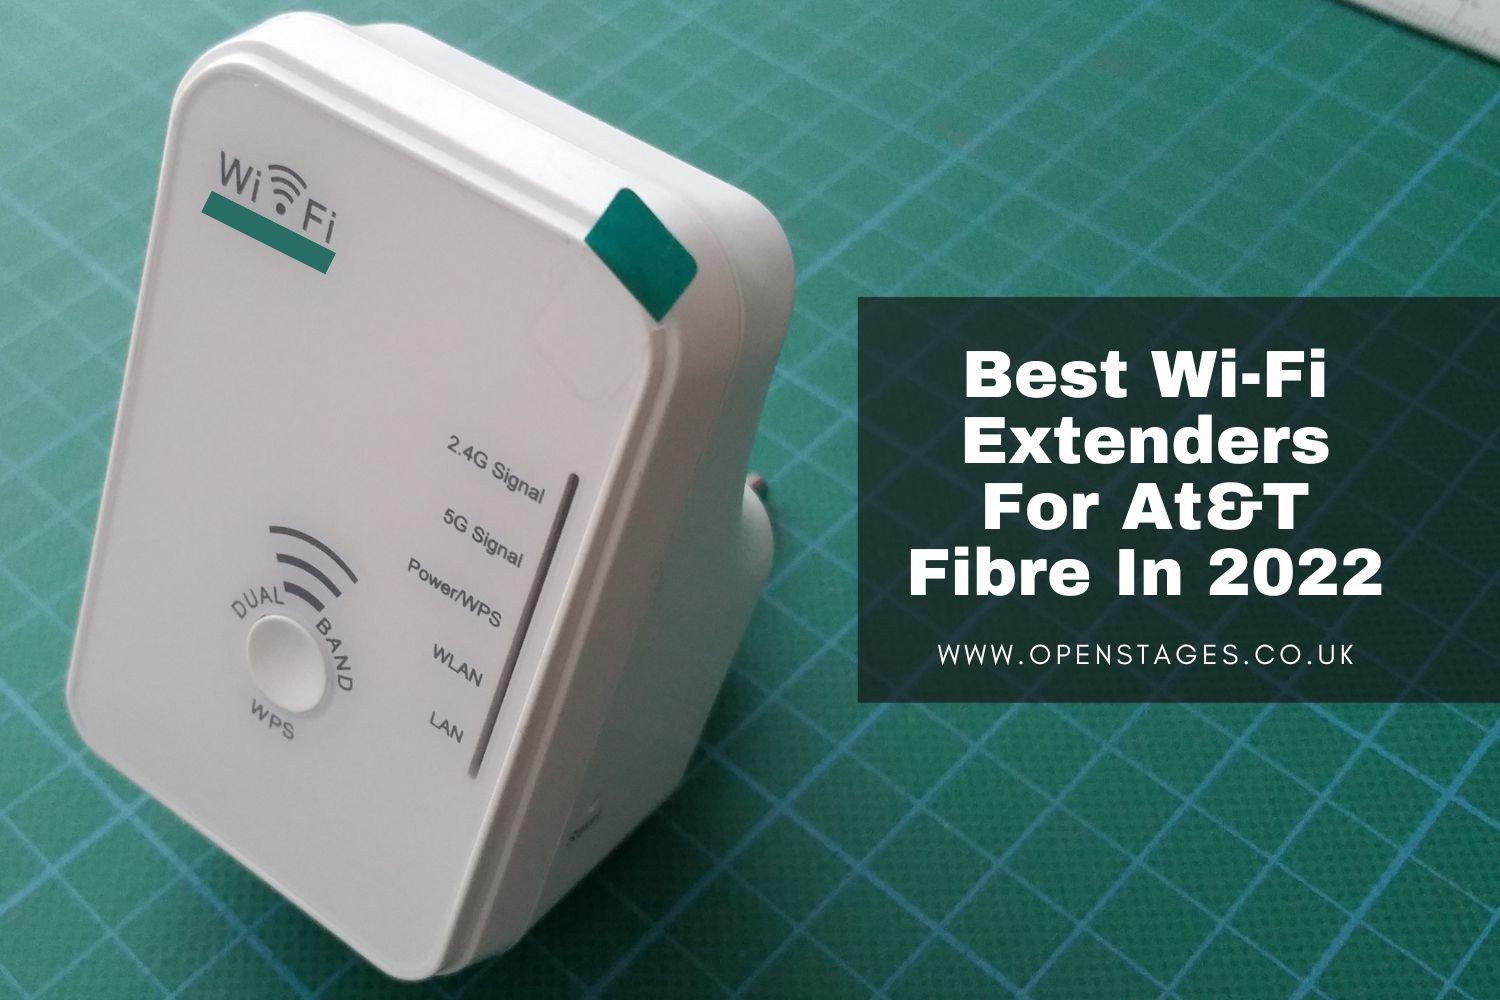 5 Best Wi-Fi Extenders For At&T Fibre In 2022